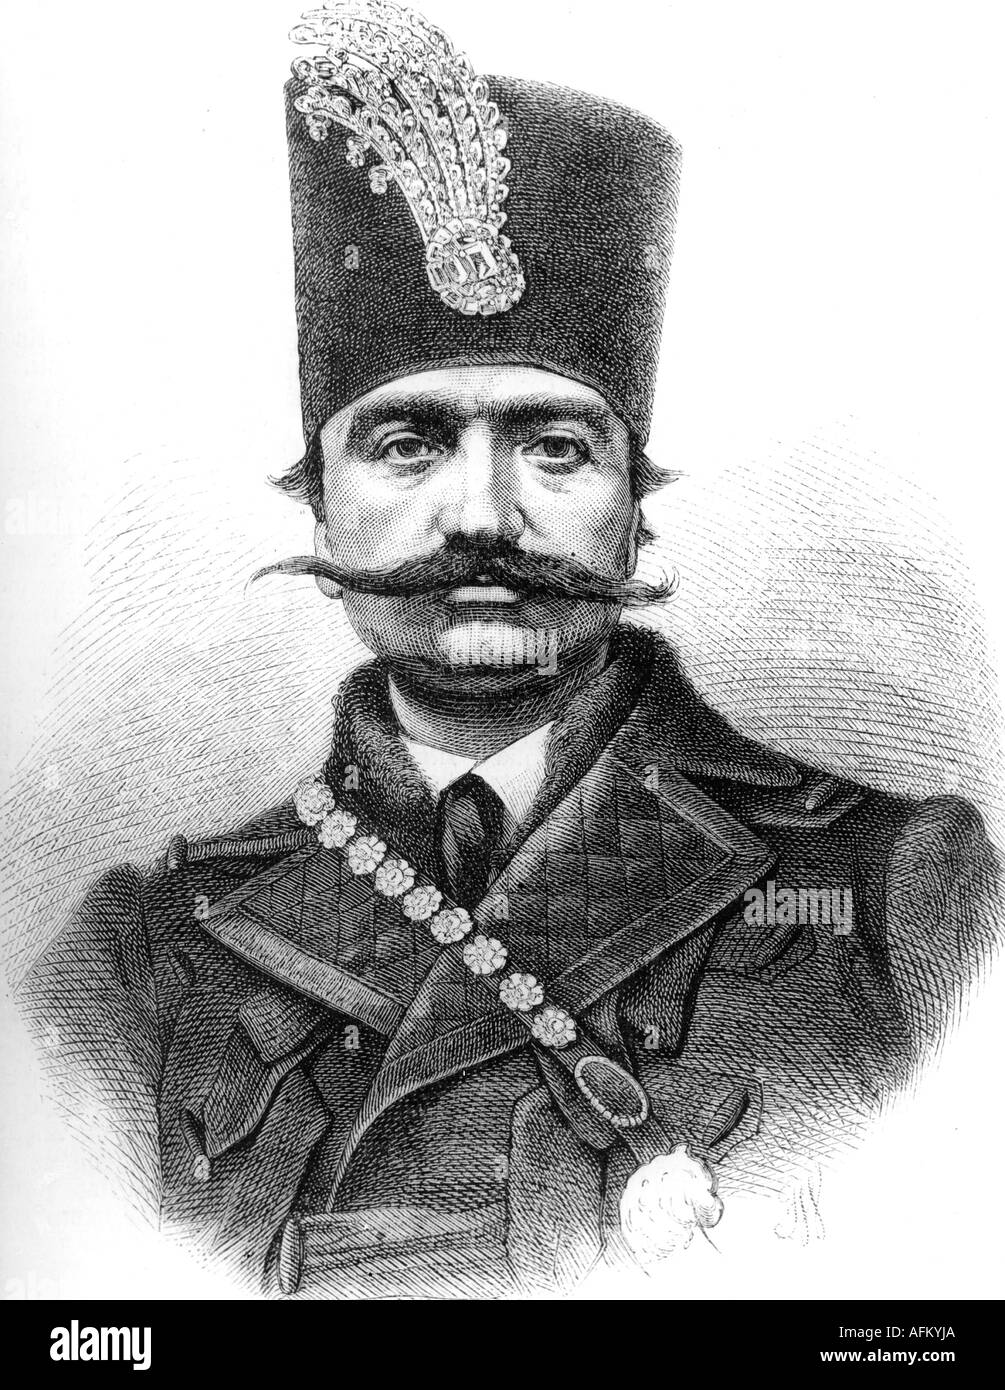 Nasser-al-Din Shah, 16.7.1831 - 1.5.1896, Shah of Persia 1848 - 1896, portrait, wood engraving, 1873, after drawing by F. Weiss, Stock Photo